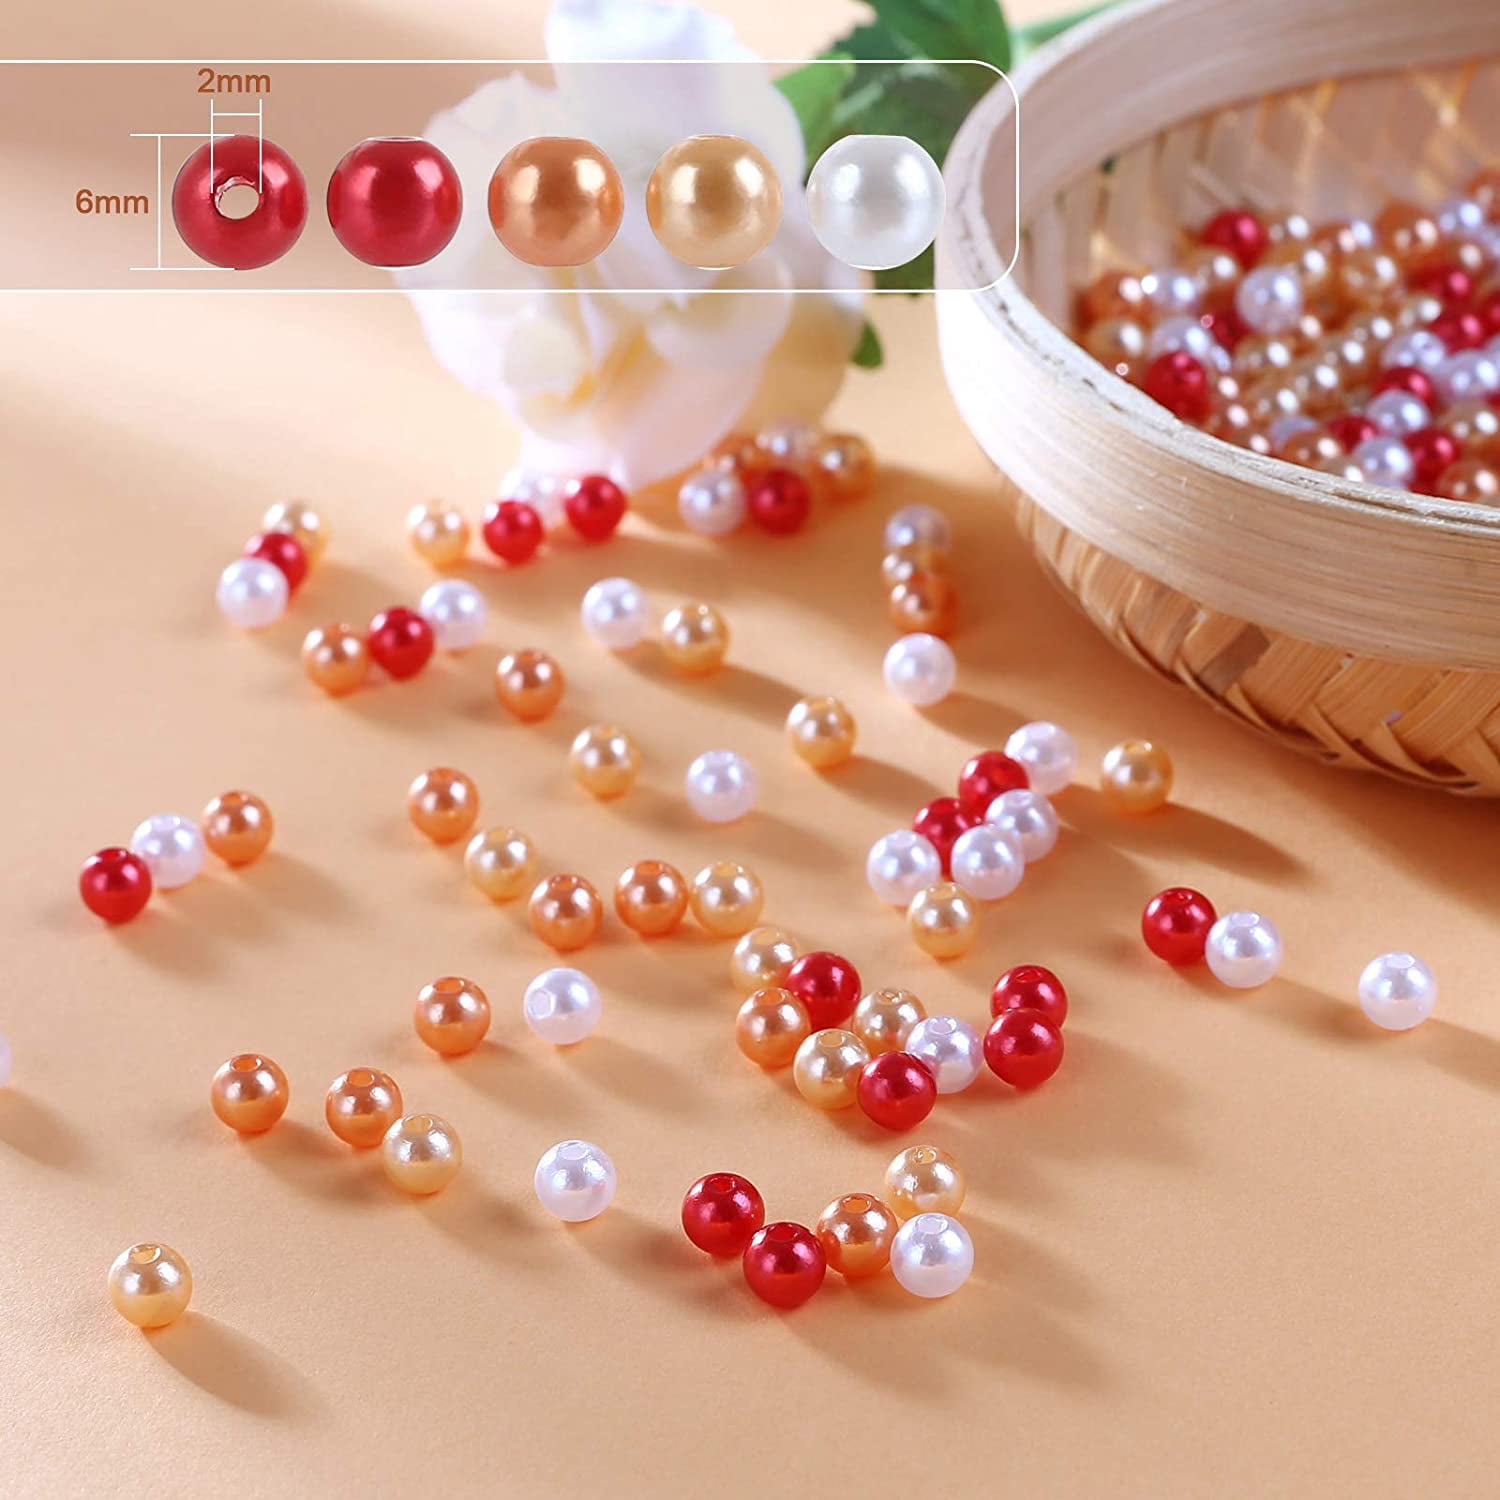 780pcs 5 Sizes Golden Pearl Beads No Holes Elegant Luster, Pearls For Crafts,  DIY, Vase Filling, Wedding, Birthday Party, Home Decoration (4mm, 5mm,6mm,  8mm,10mm)